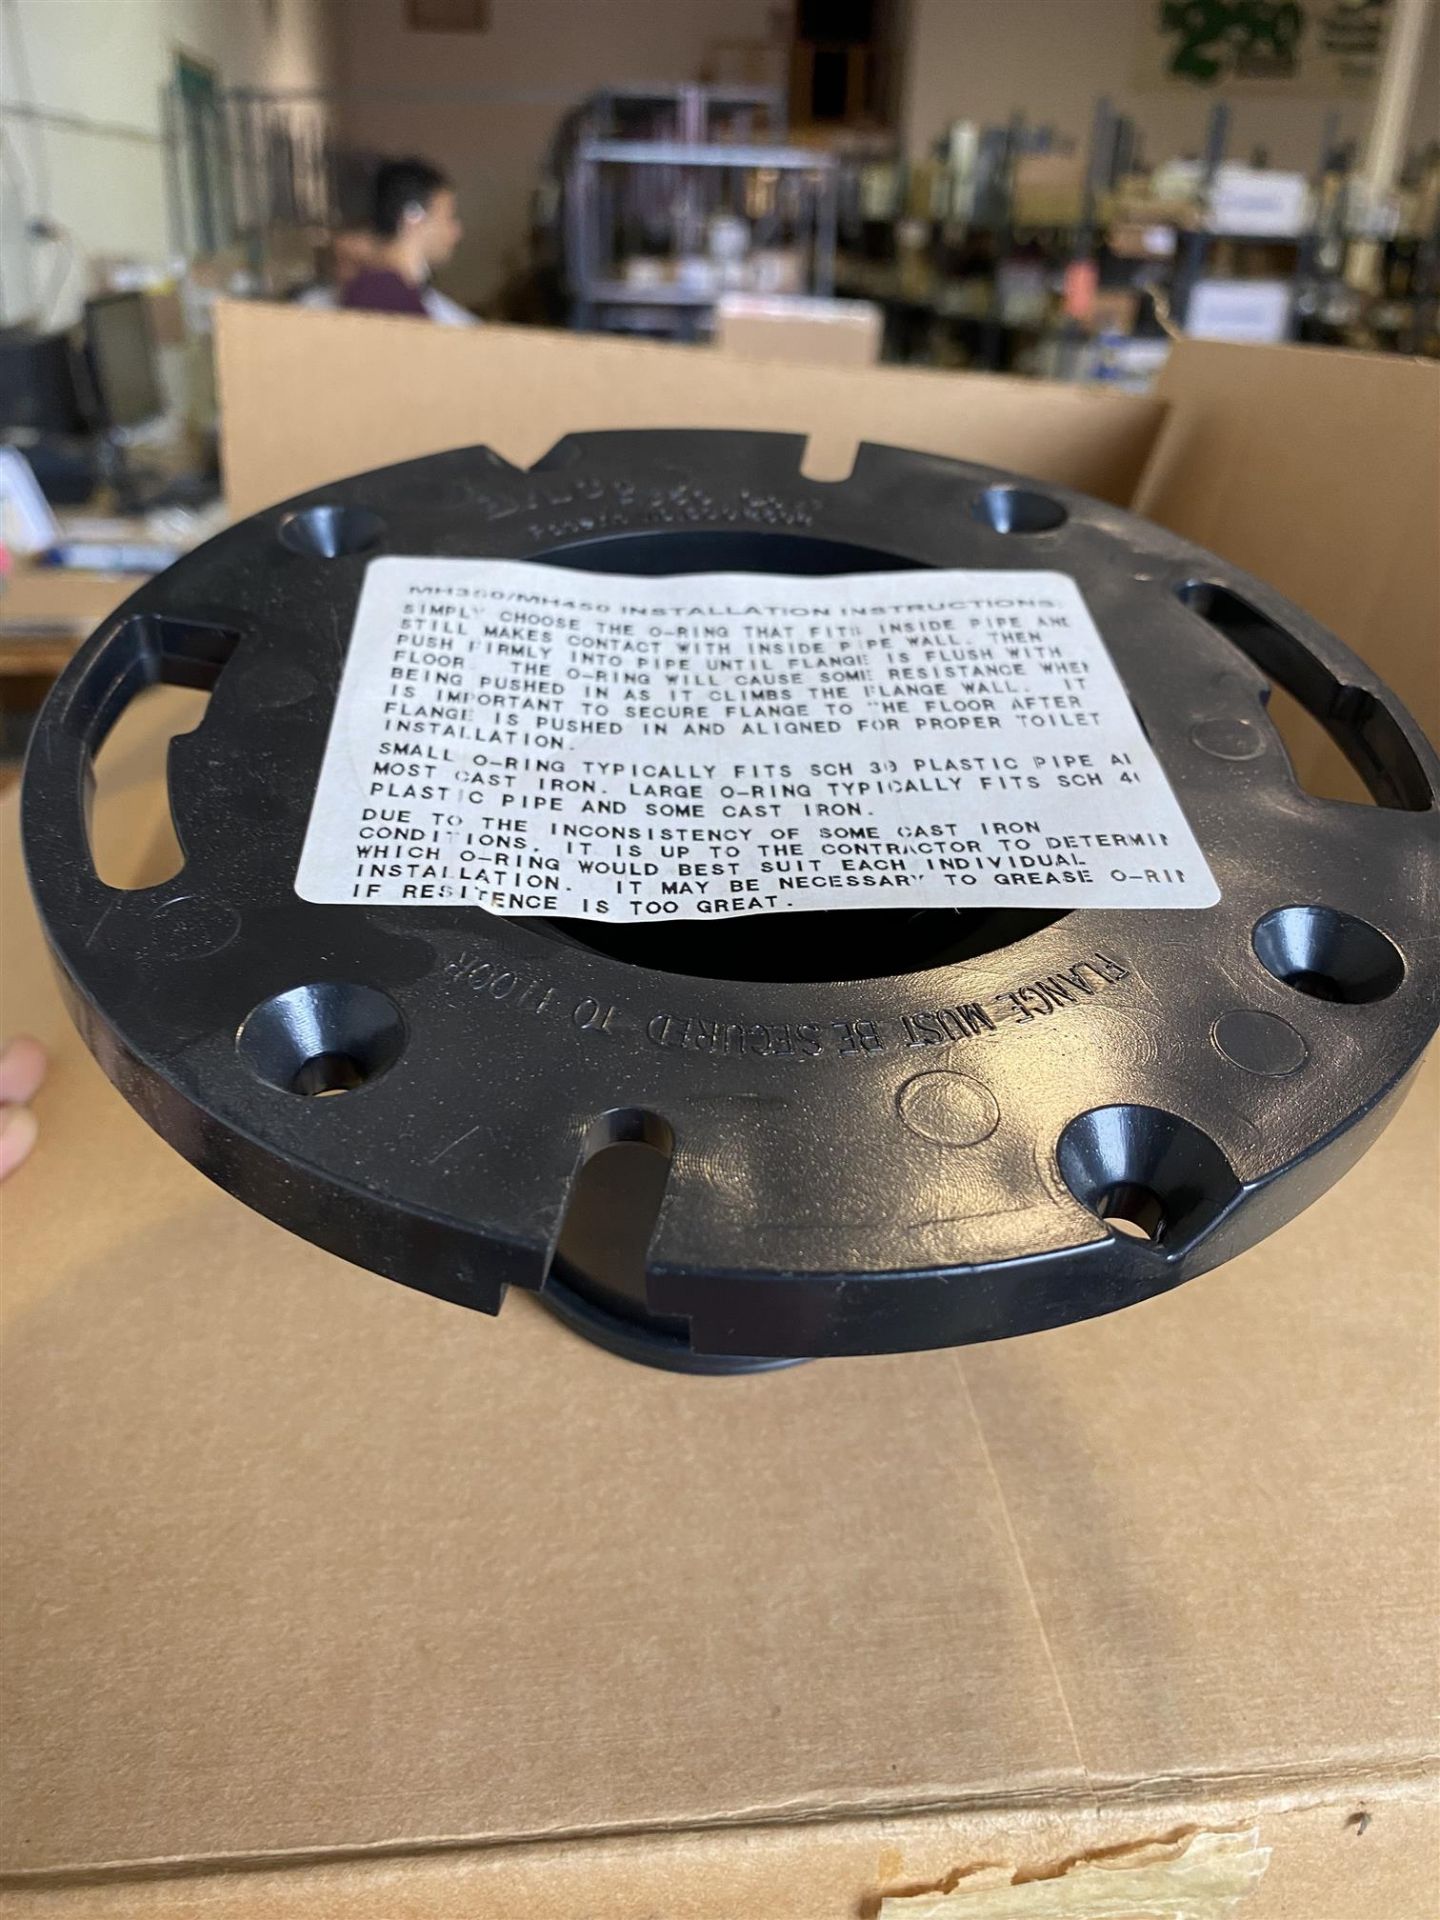 BRUCO PRODUCTS LLC - INSIDE 3" COMPRESSION FLANGE ABS - PART #MH350A - 26PCS - Image 2 of 2